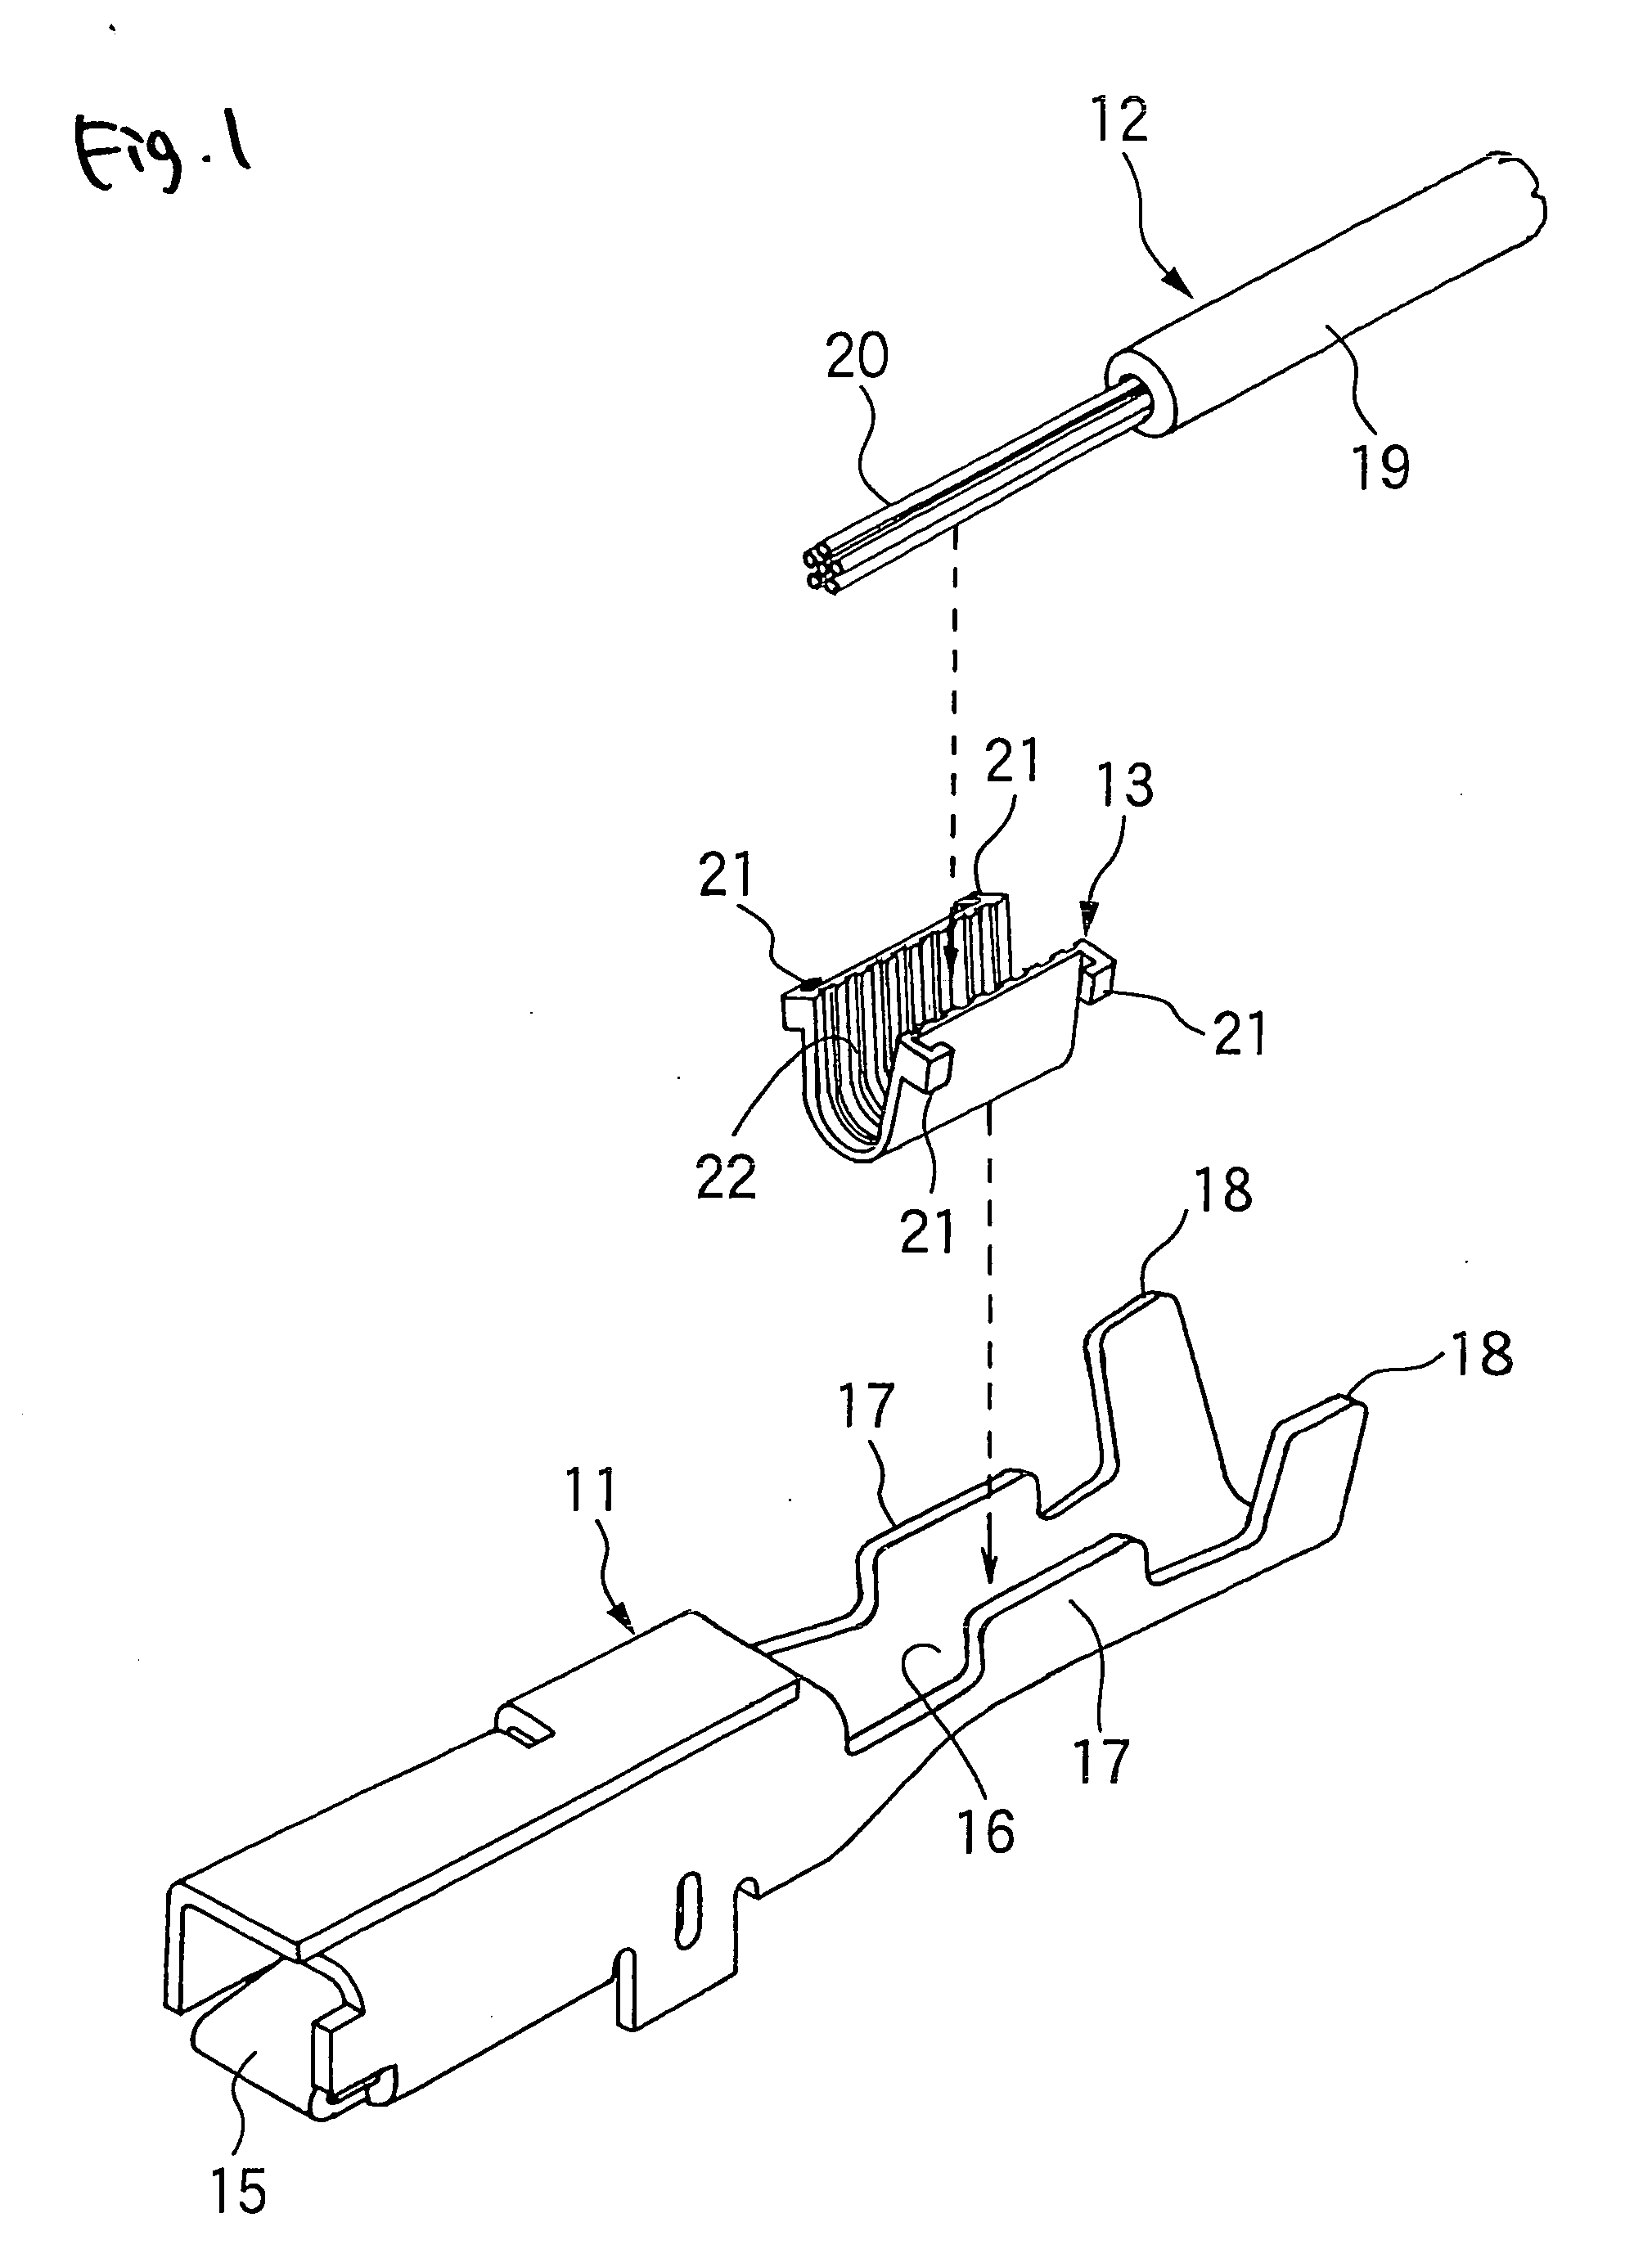 Wire press-clamping method